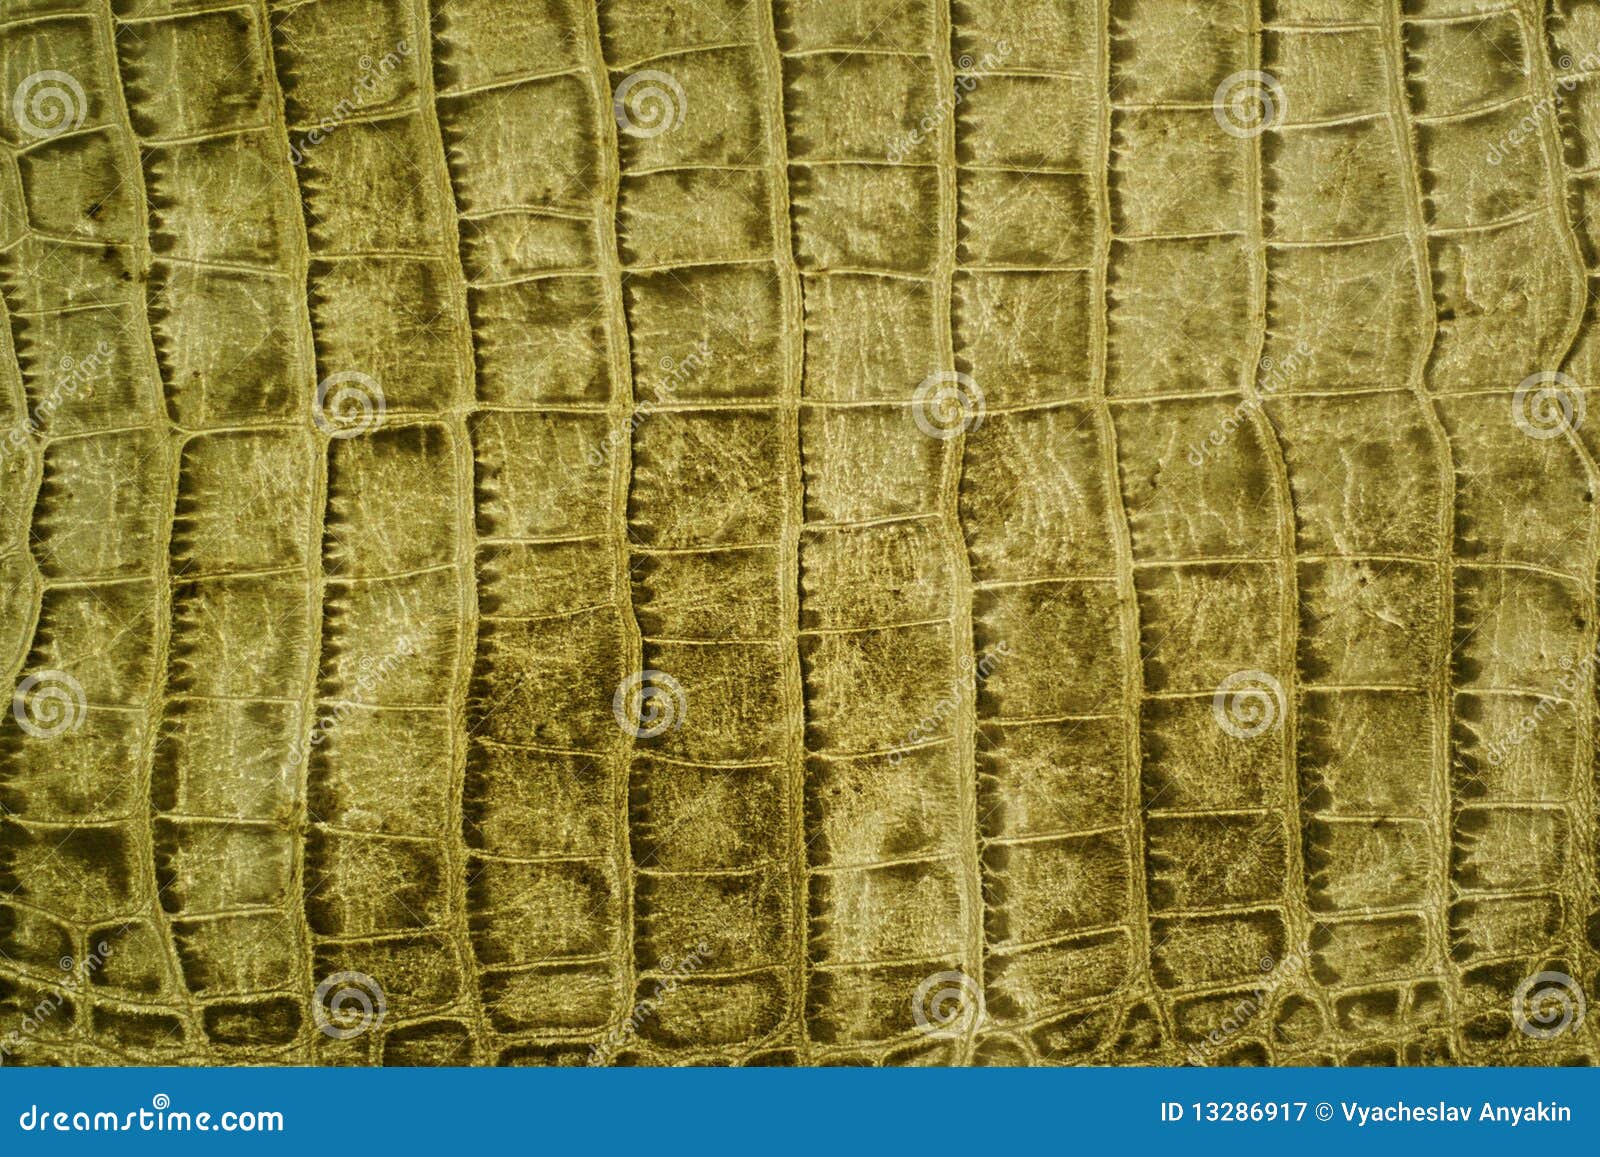 790 Red Crocodile Leather Texture Stock Photos - Free & Royalty-Free Stock  Photos from Dreamstime